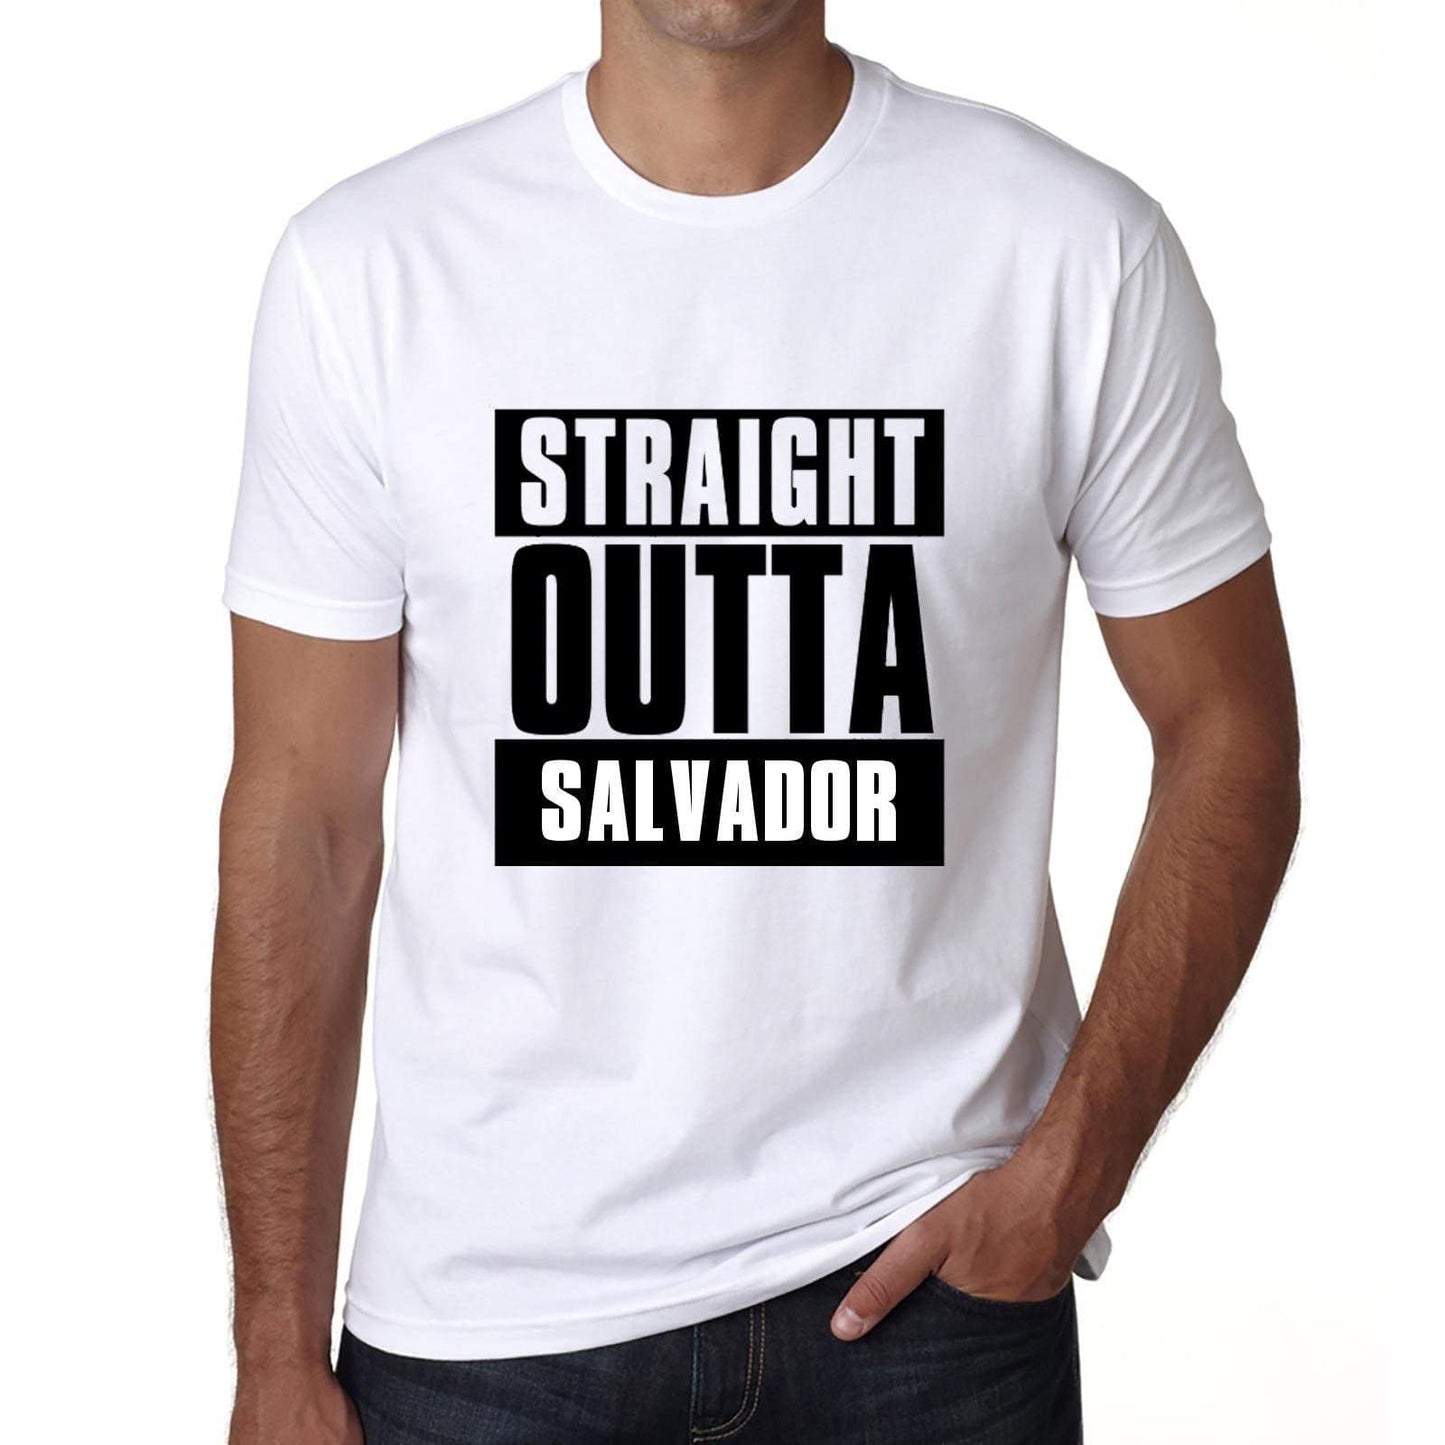 Straight Outta Salvador Mens Short Sleeve Round Neck T-Shirt 00027 - White / S - Casual